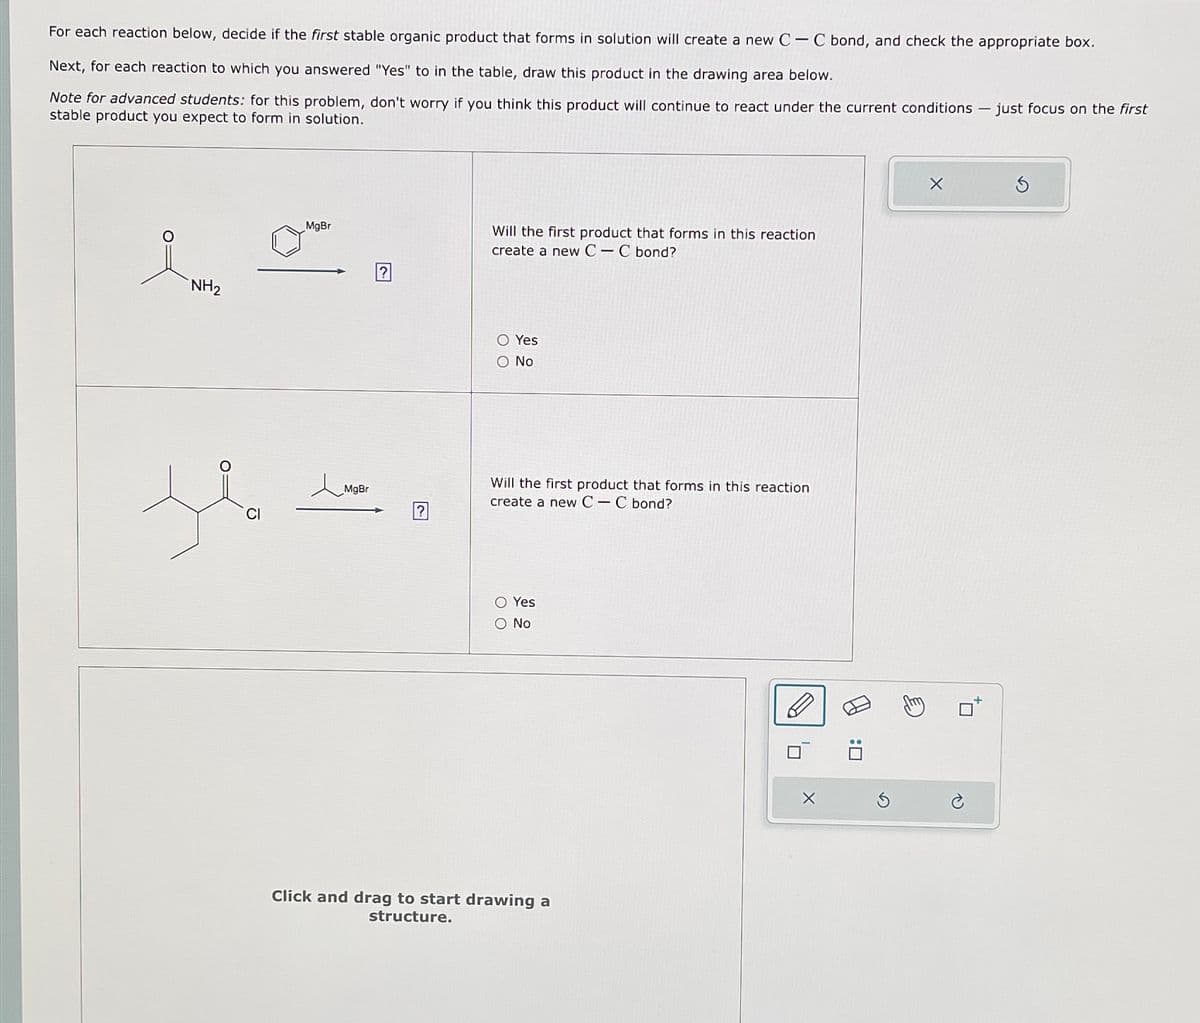 For each reaction below, decide if the first stable organic product that forms in solution will create a new CC bond, and check the appropriate box.
Next, for each reaction to which you answered "Yes" to in the table, draw this product in the drawing area below.
Note for advanced students: for this problem, don't worry if you think this product will continue to react under the current conditions - just focus on the first
stable product you expect to form in solution.
NH2
MgBr
Will the first product that forms in this reaction
create a new CC bond?
1。
MgBr
00
Yes
○ No
?
Will the first product that forms in this reaction
create a new CC bond?
○ Yes
○ No.
Click and drag to start drawing a
structure.
✗
ח'
: